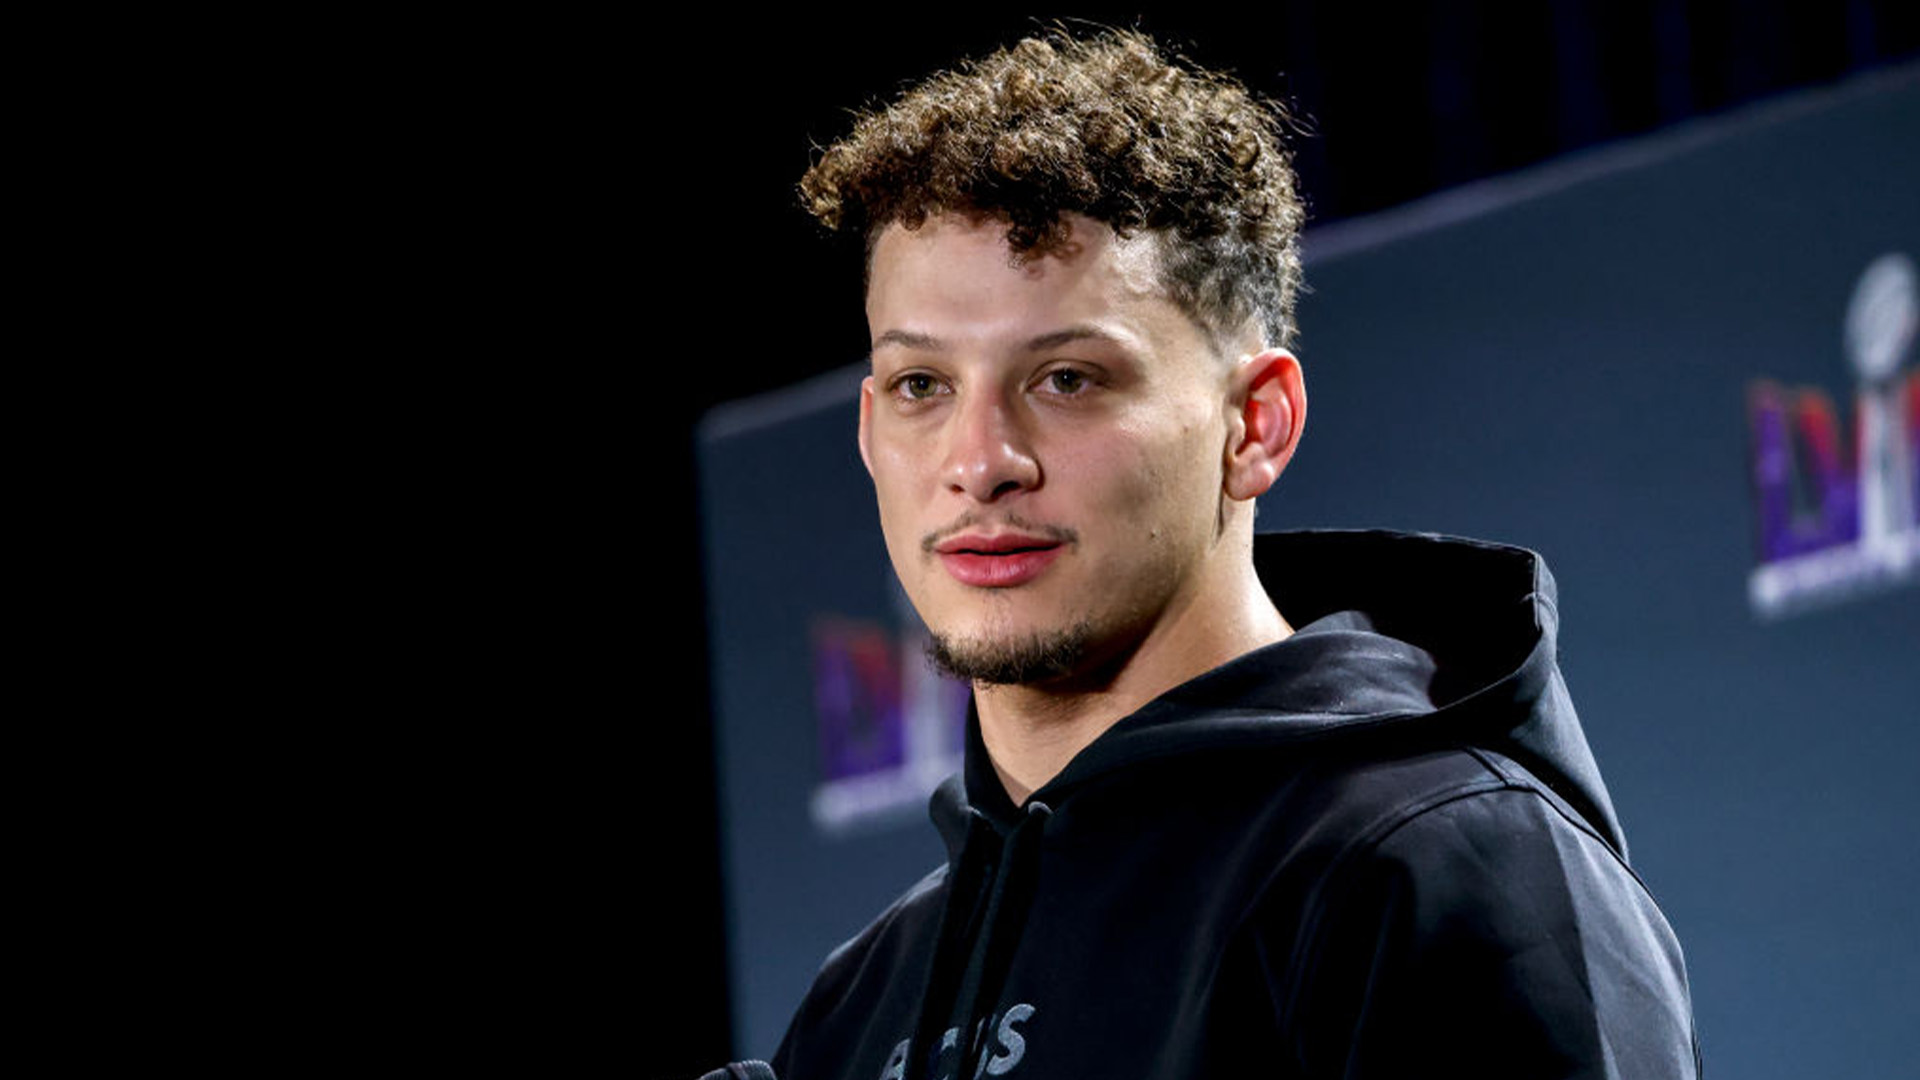 Patrick Mahomes To Open A 'One-Of-A-Kind' Steakhouse In Kansas City, MO